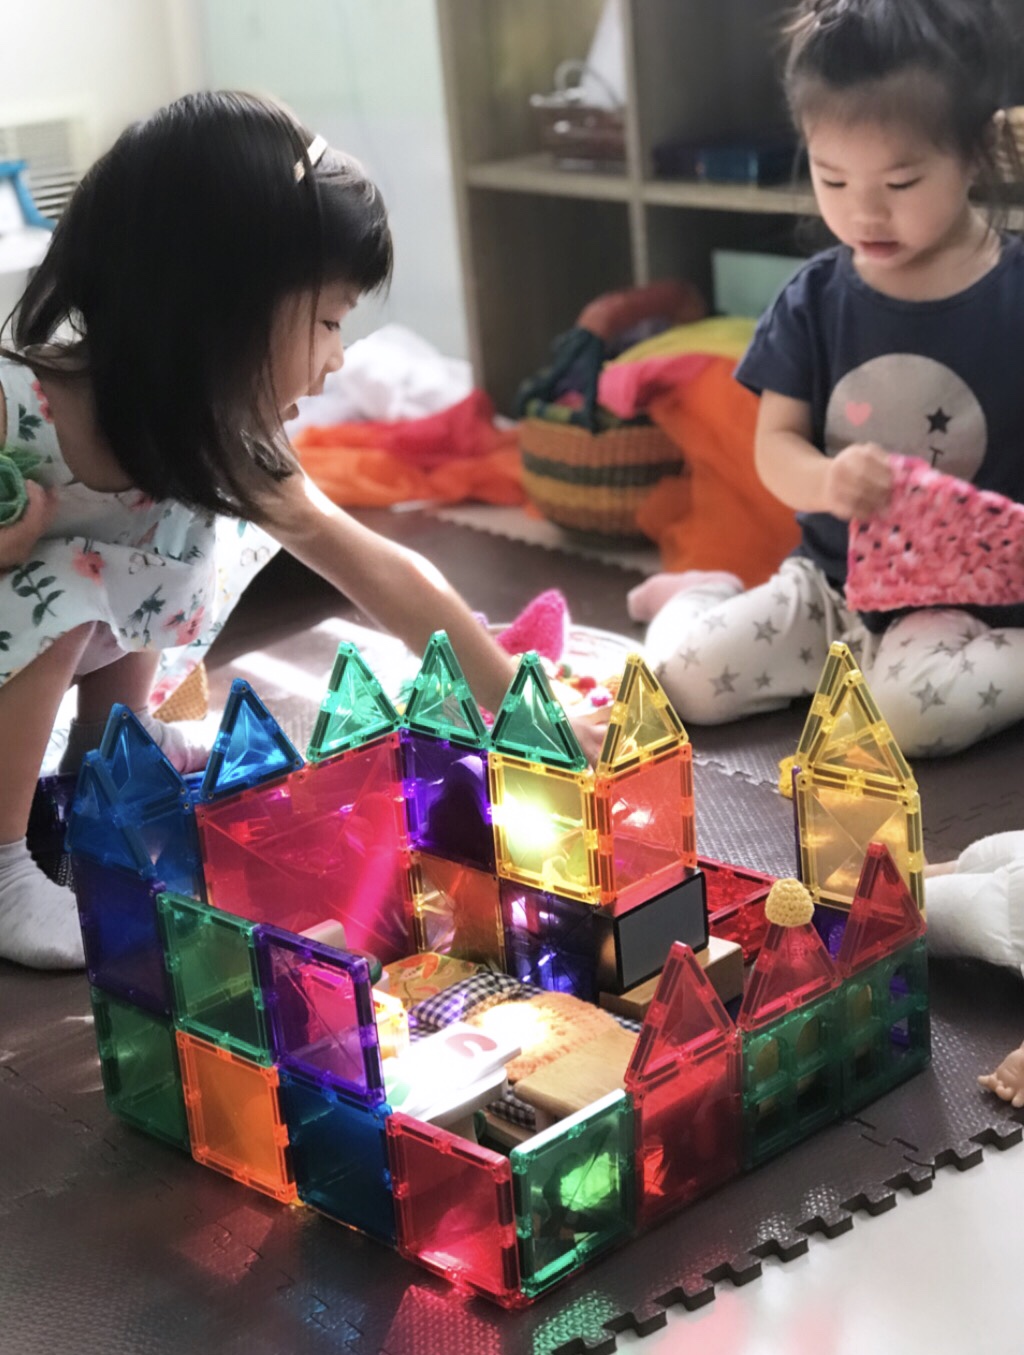 The best magnetic tile toys as gifts: MagnaTiles, Magformers, Connetix